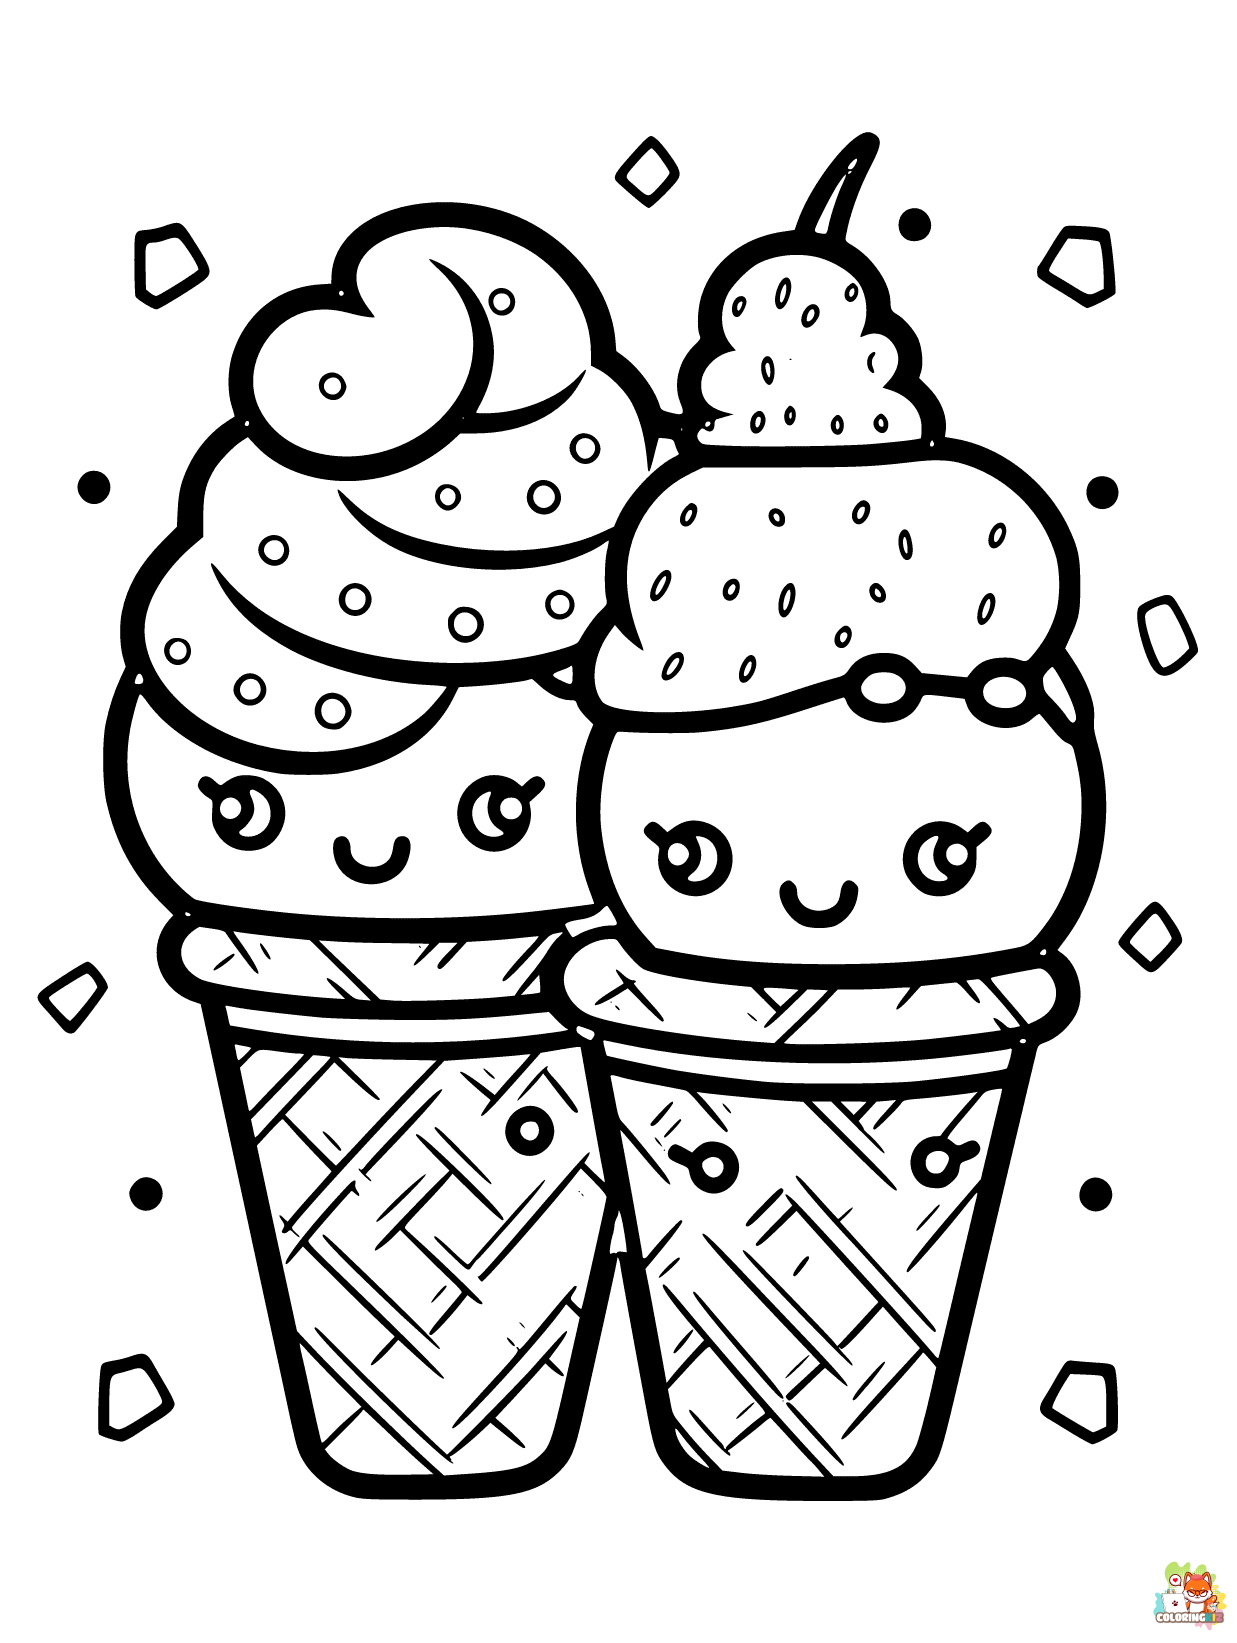 Ice cream coloring pages easy